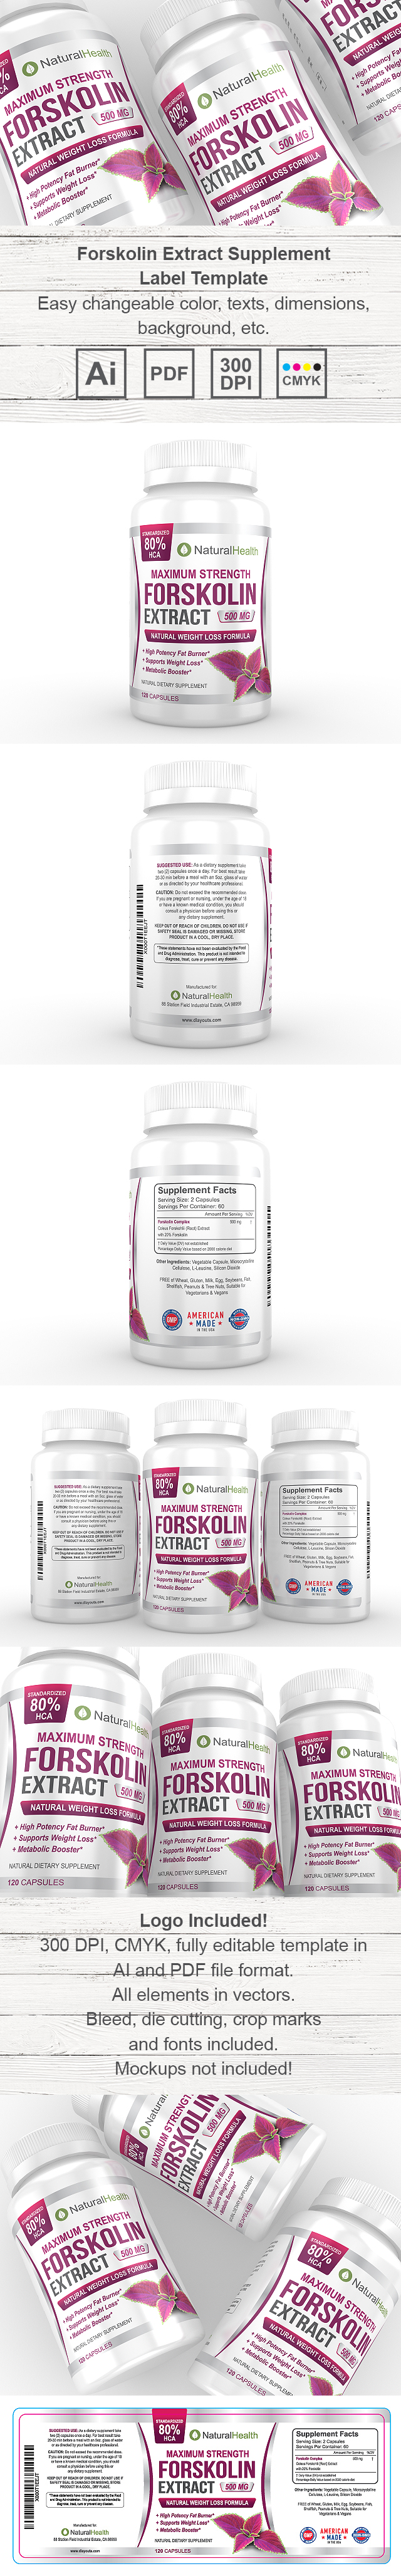 Forskolin Extract Supplement Label Template